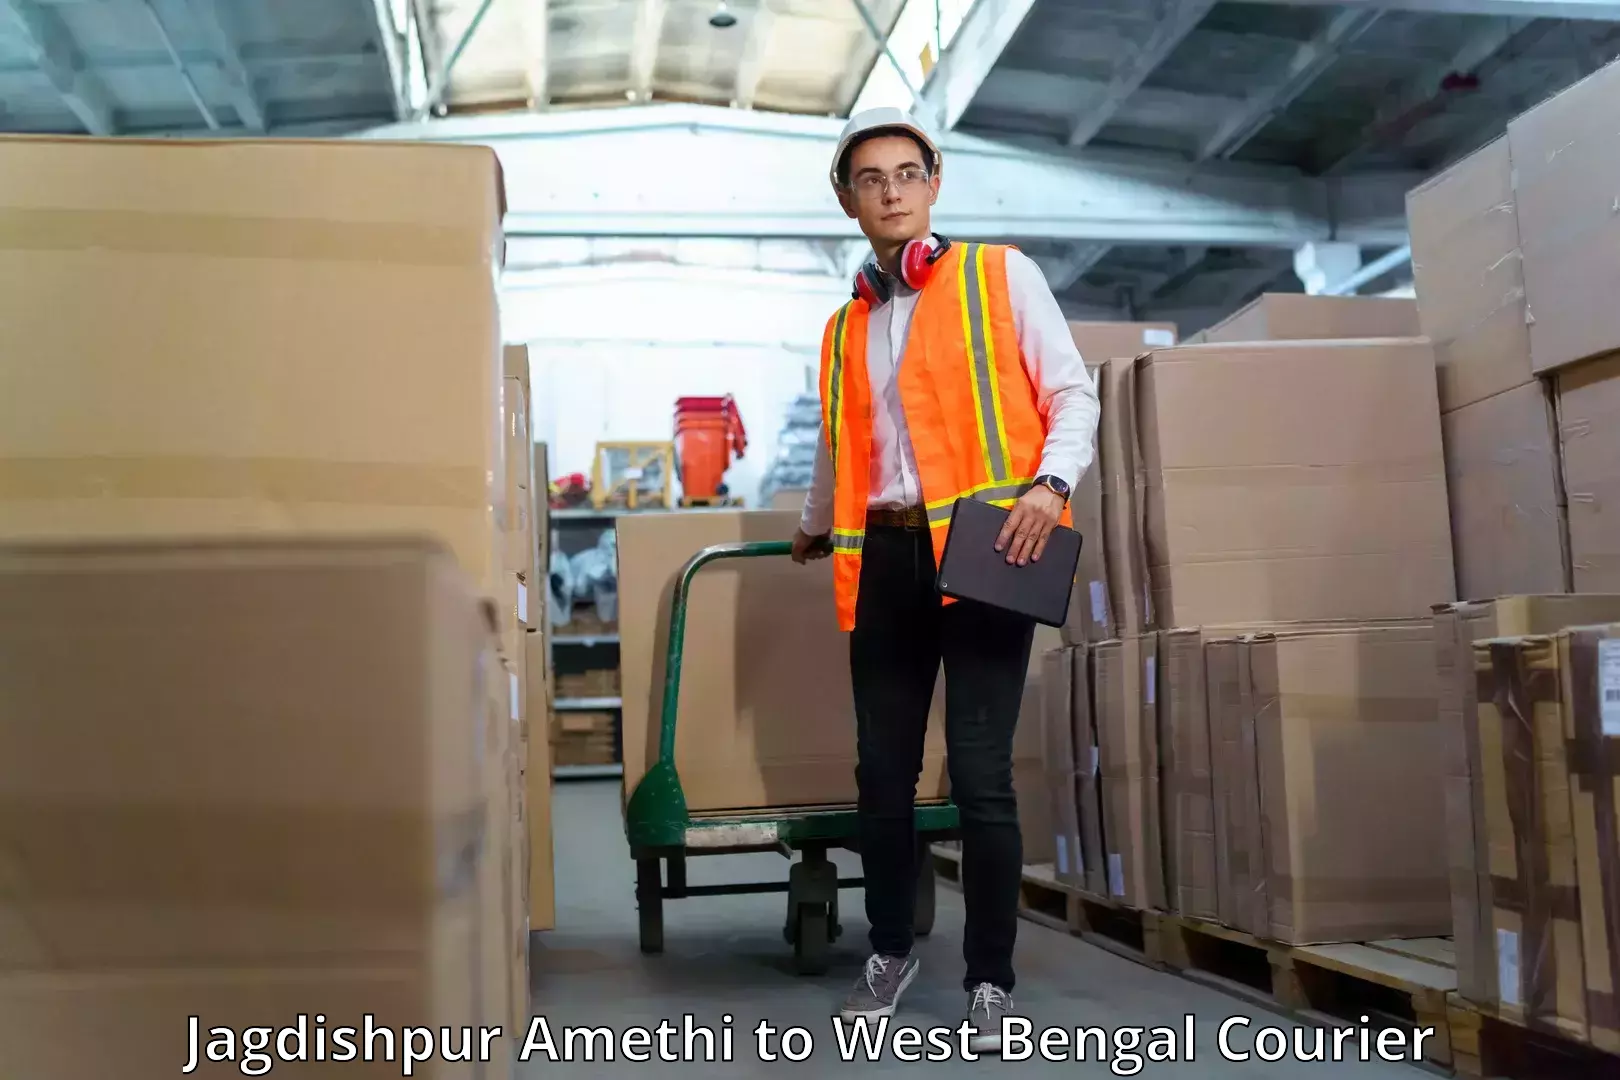 Ocean freight courier Jagdishpur Amethi to West Bengal